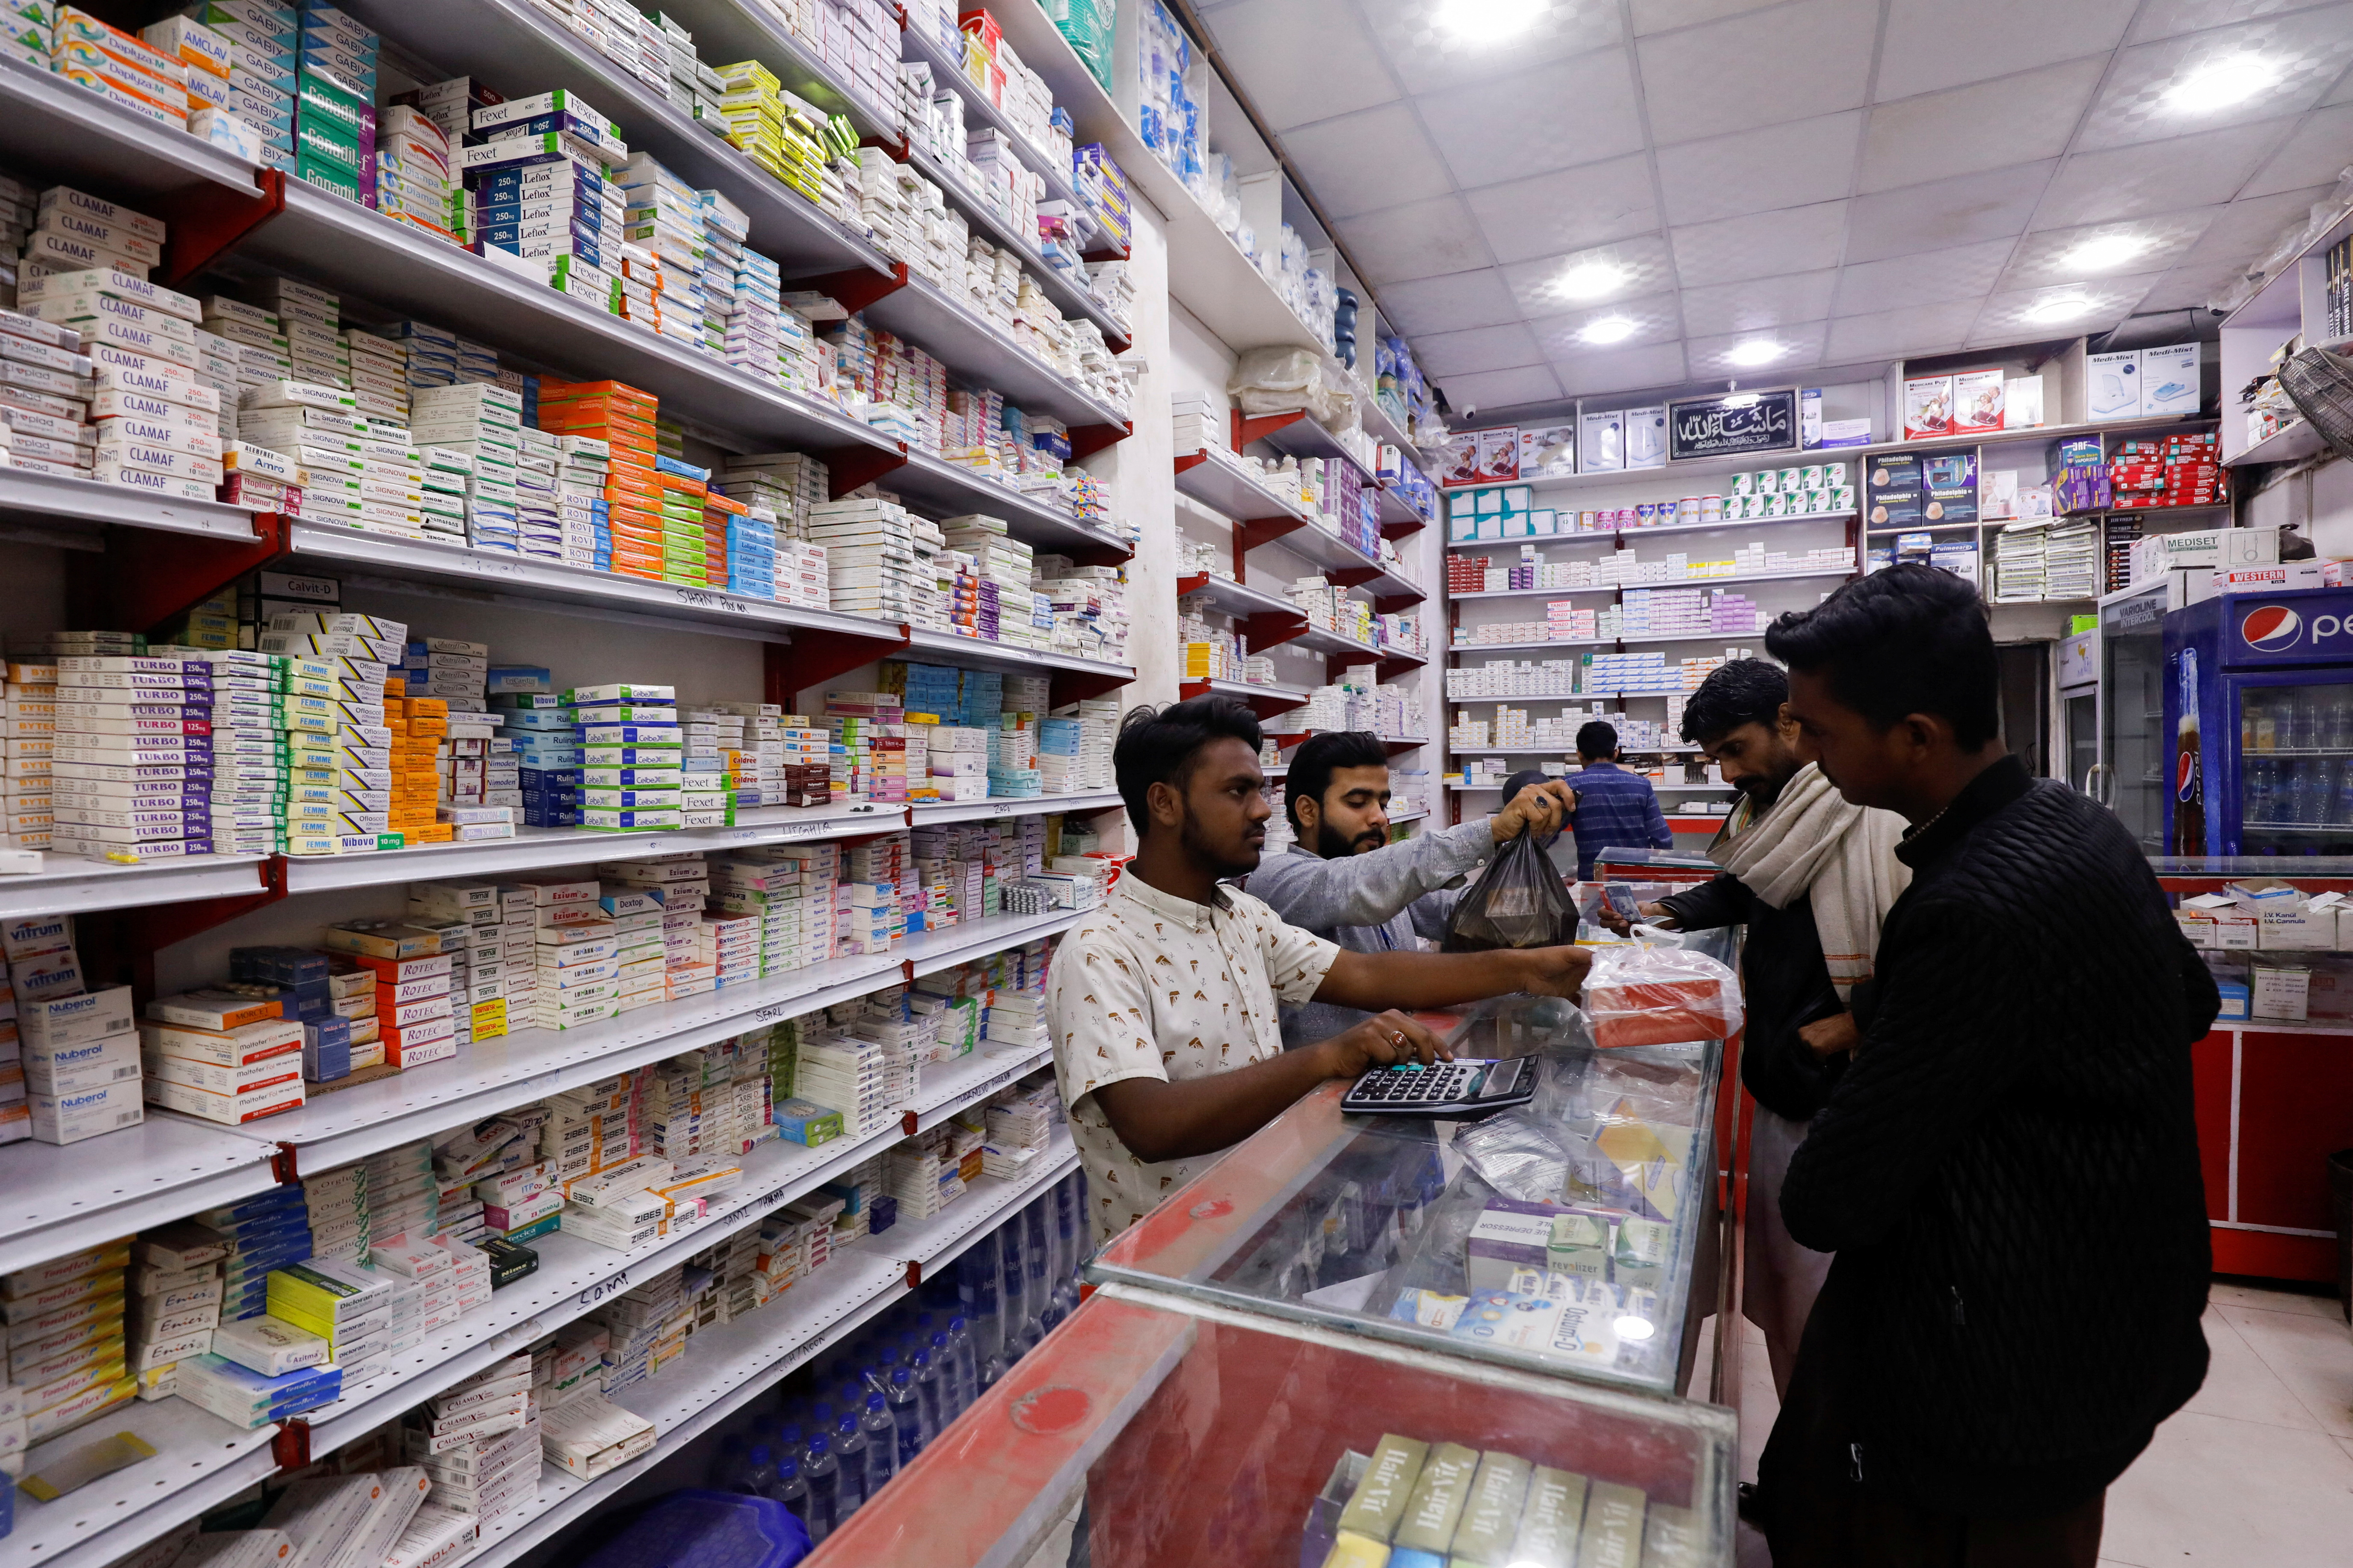 Customers buy medicine from a medical supply store in Karachi